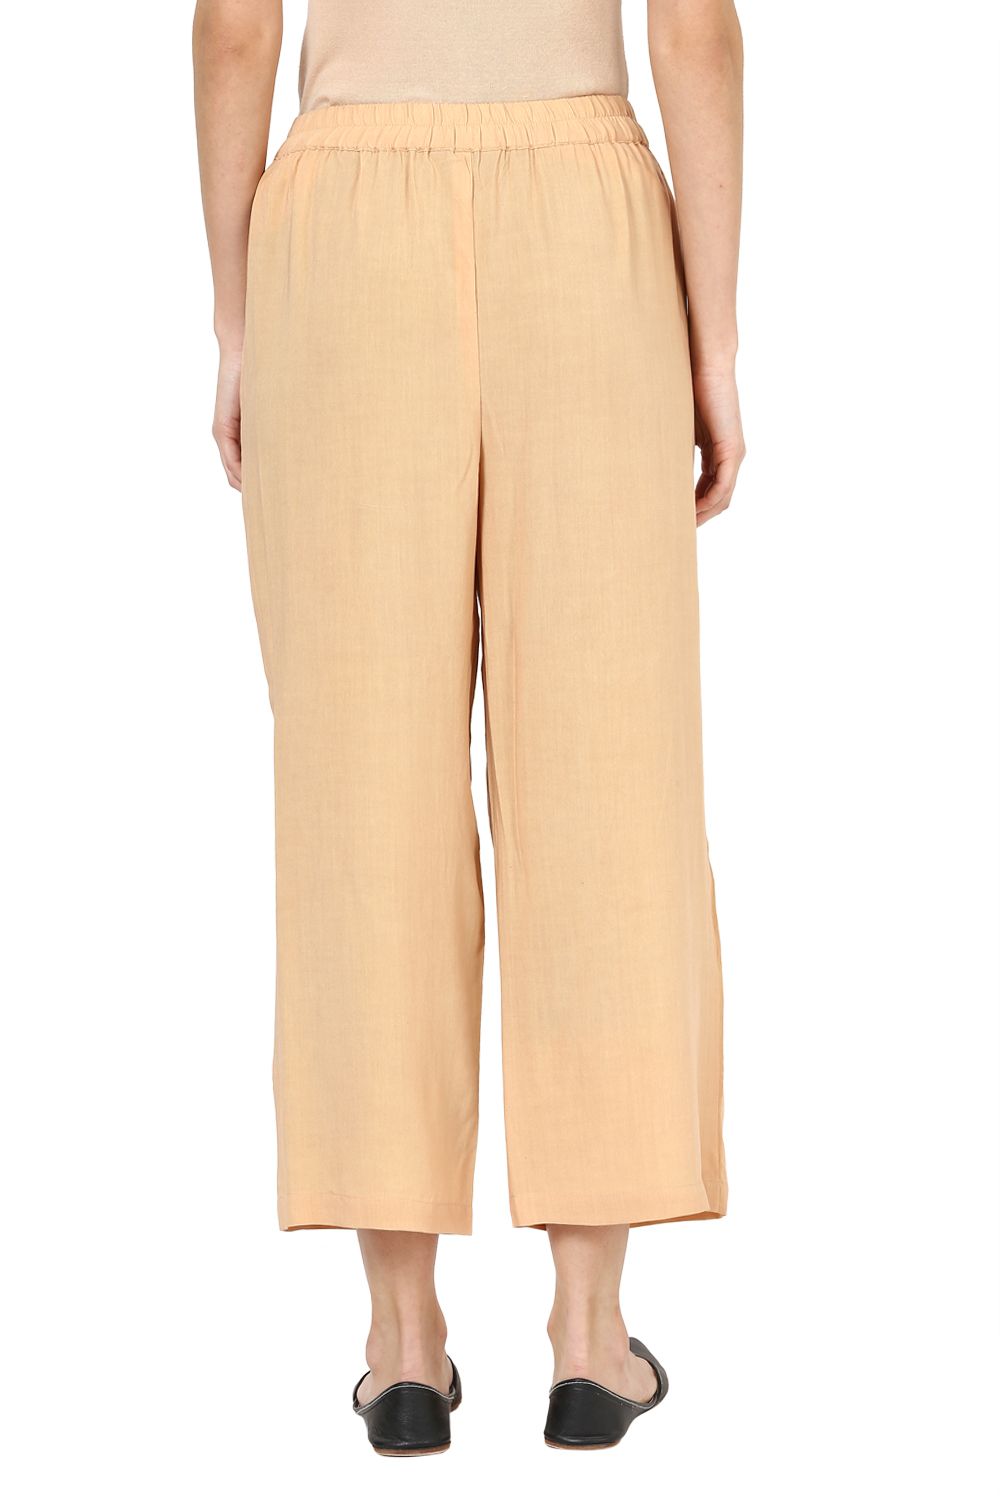 Beige Viscose Rayon Culottes image number 3